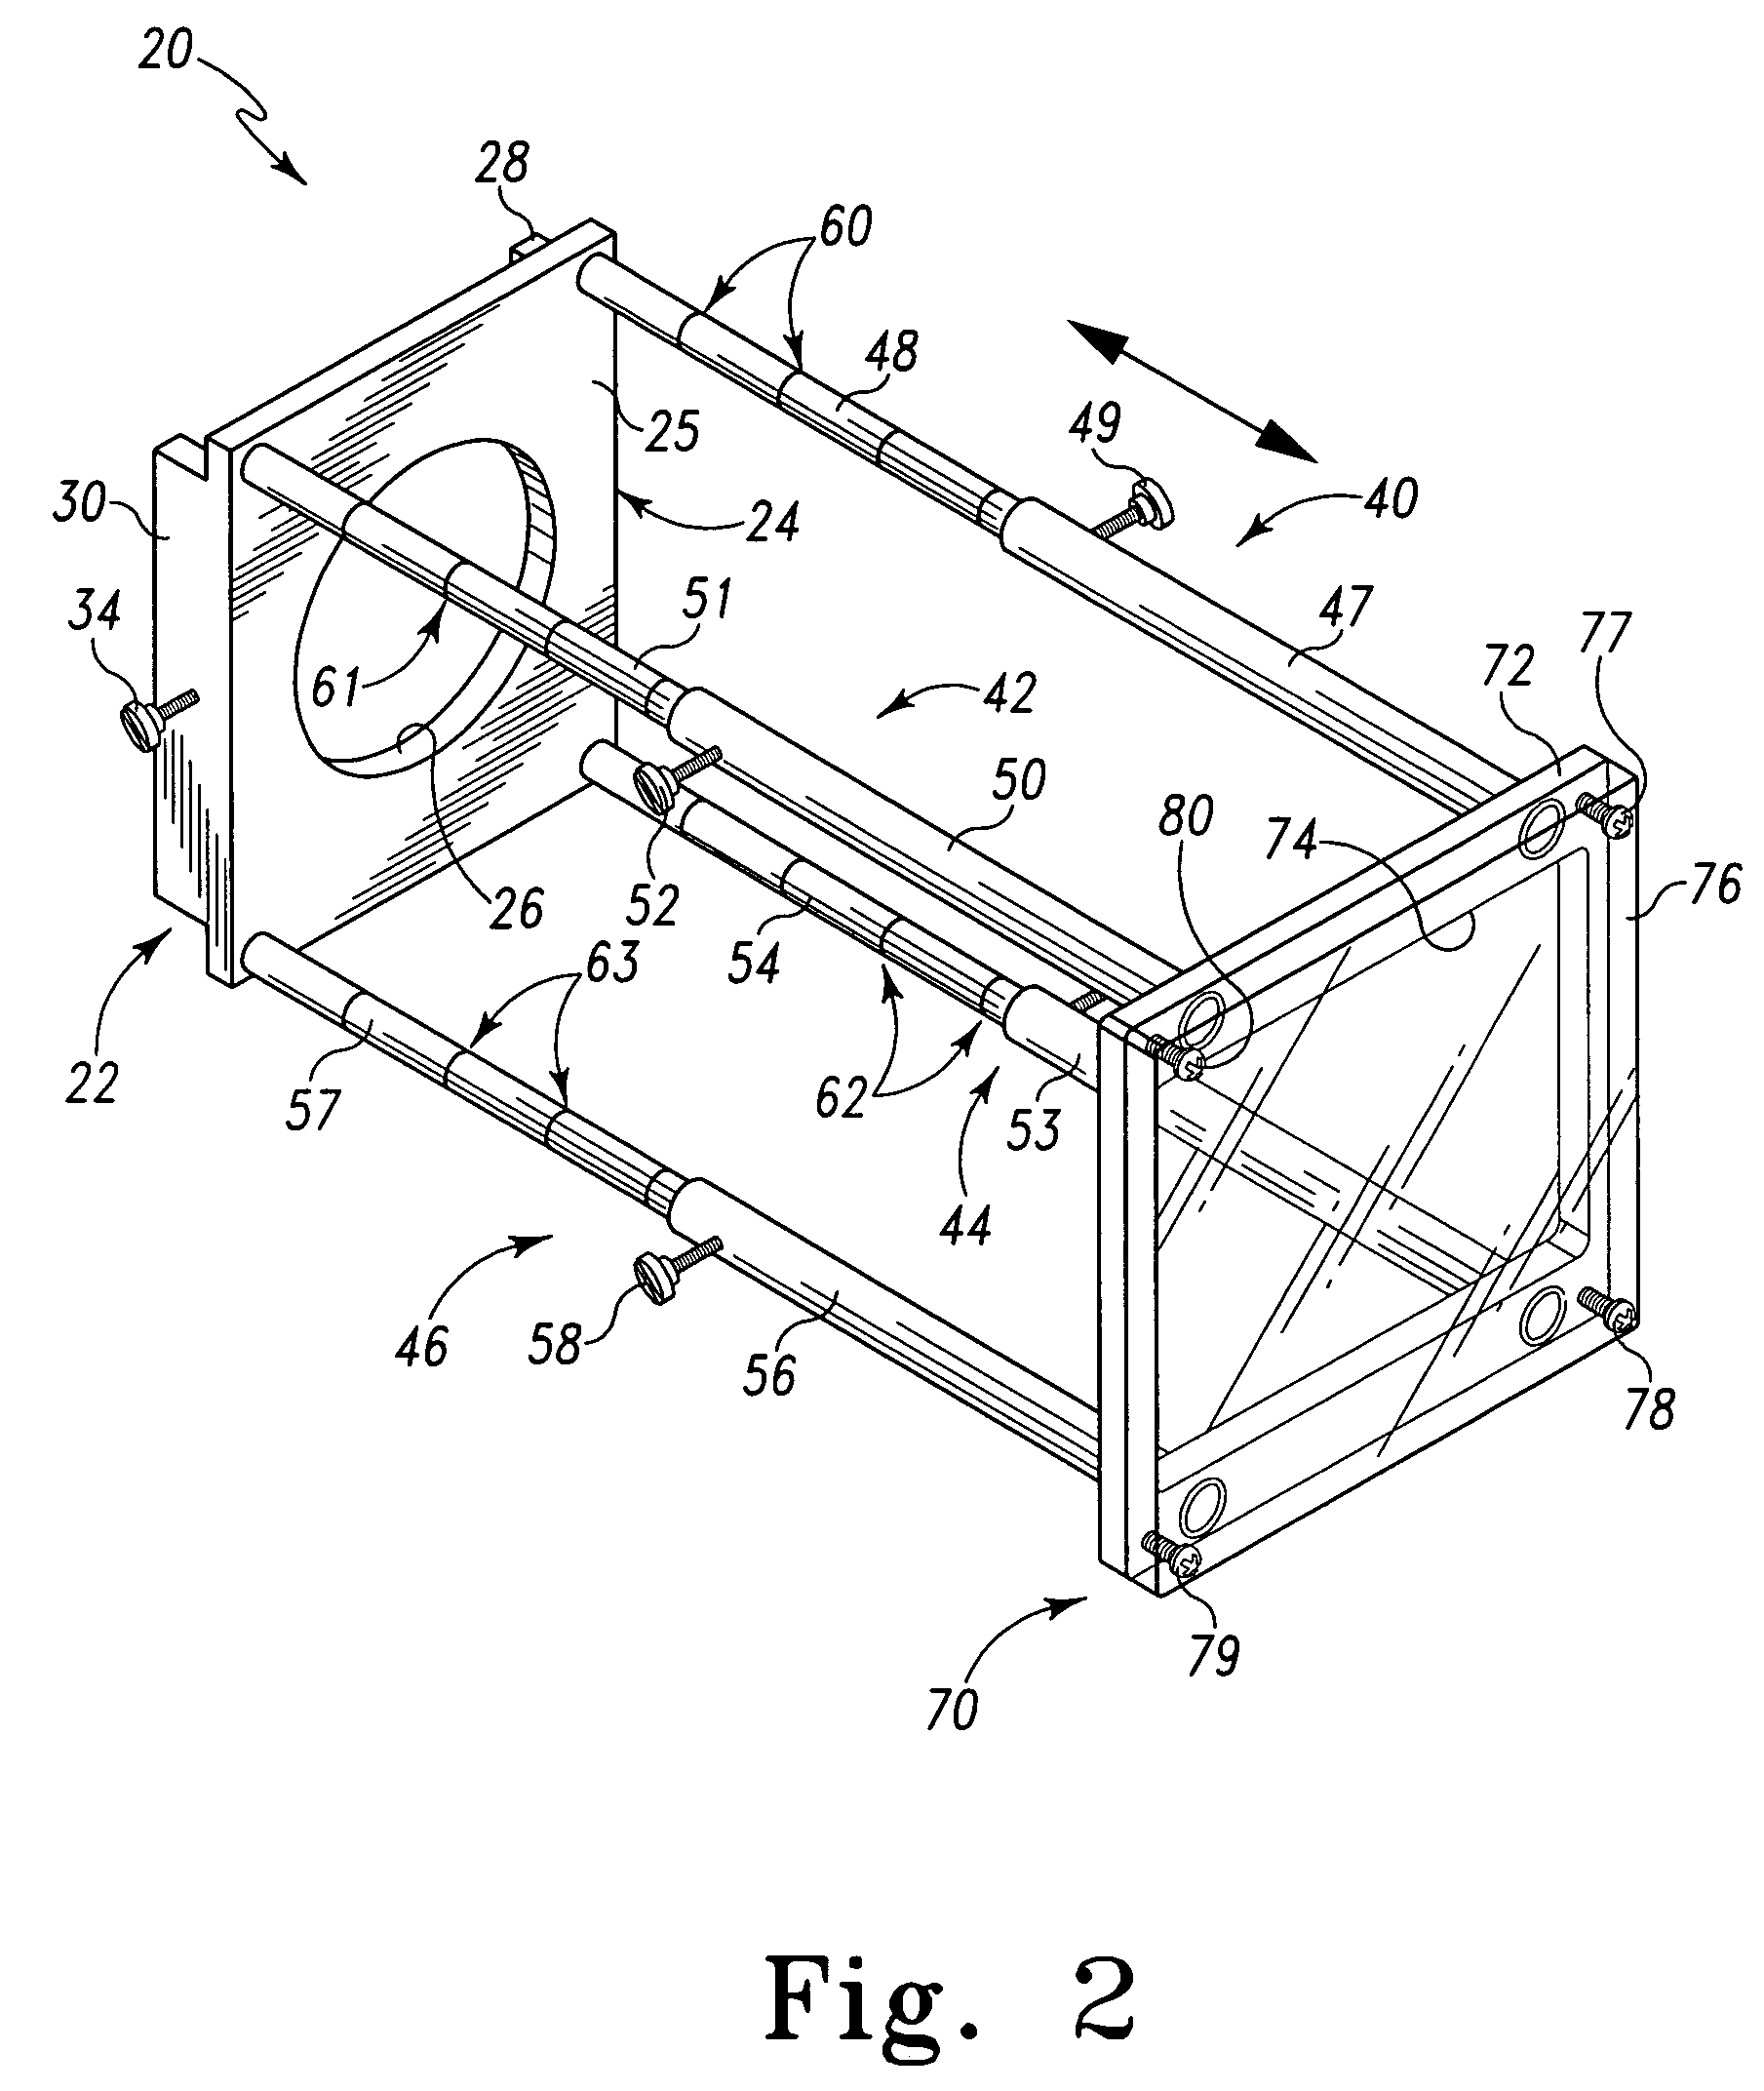 Camera attachment for compressing pliant objects during photography thereof